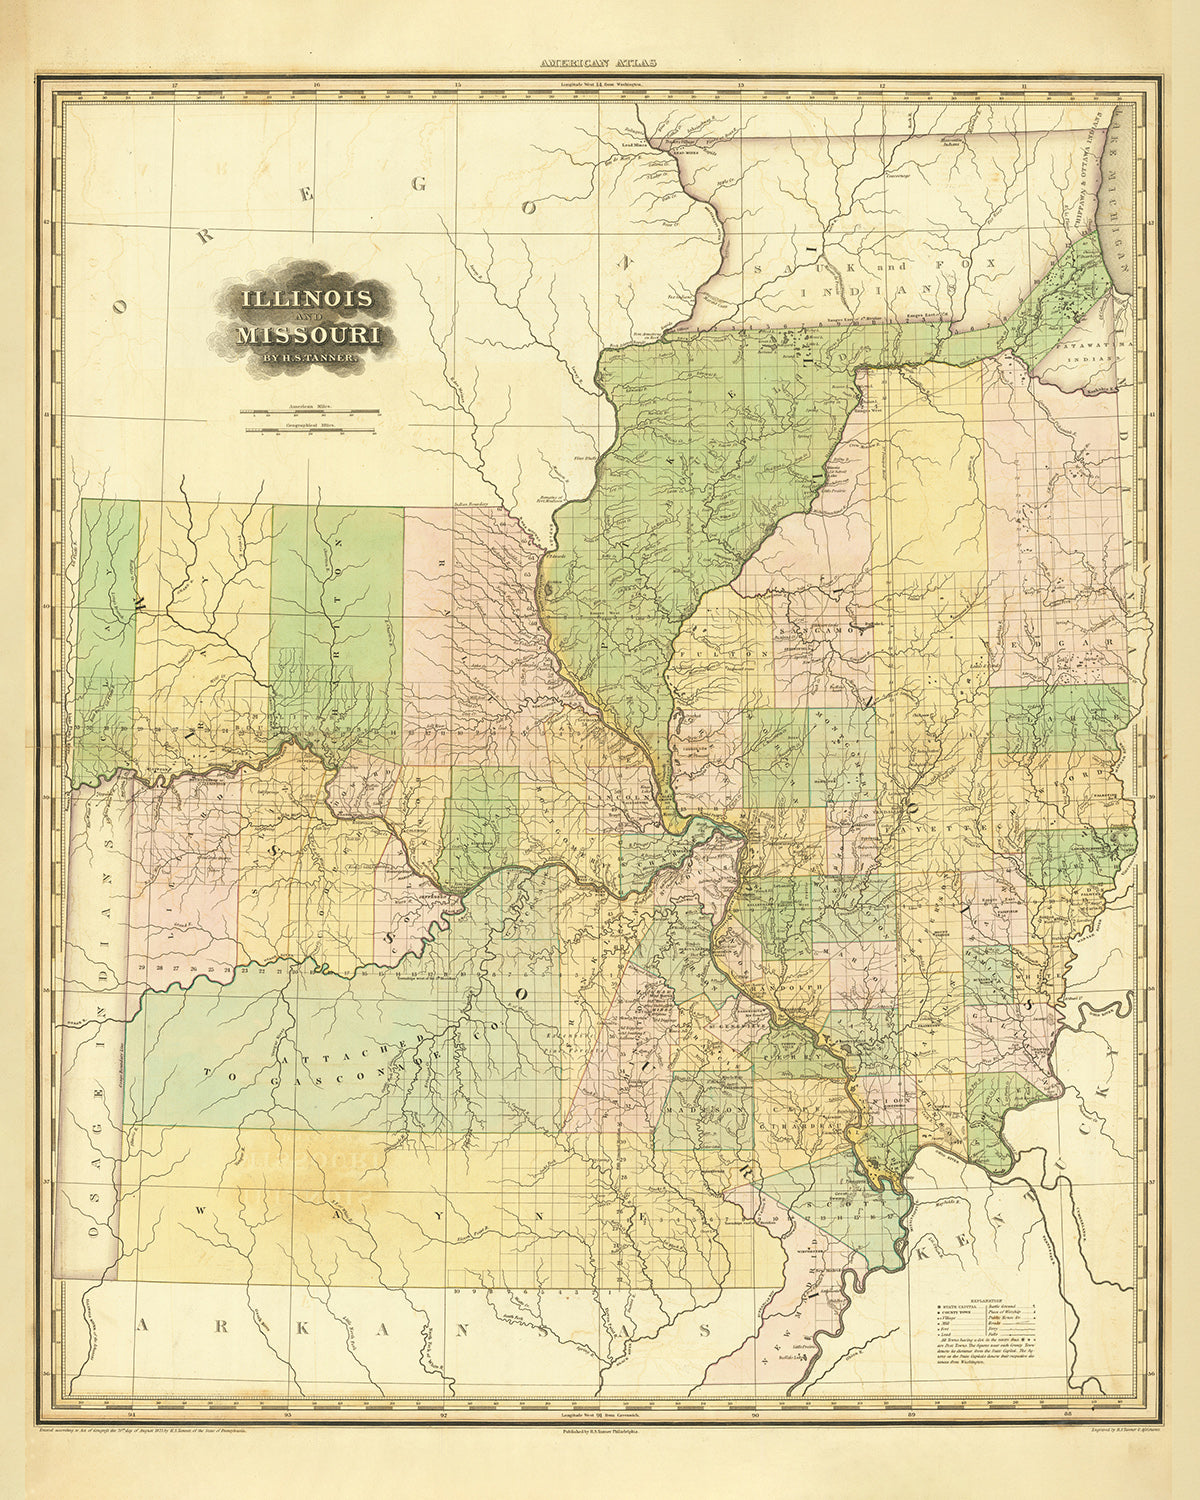 Old Map of Illinois and Missouri by H. S. Tanner, 1820: Chicago, Springfield, Peoria, Columbia, and St. Louis